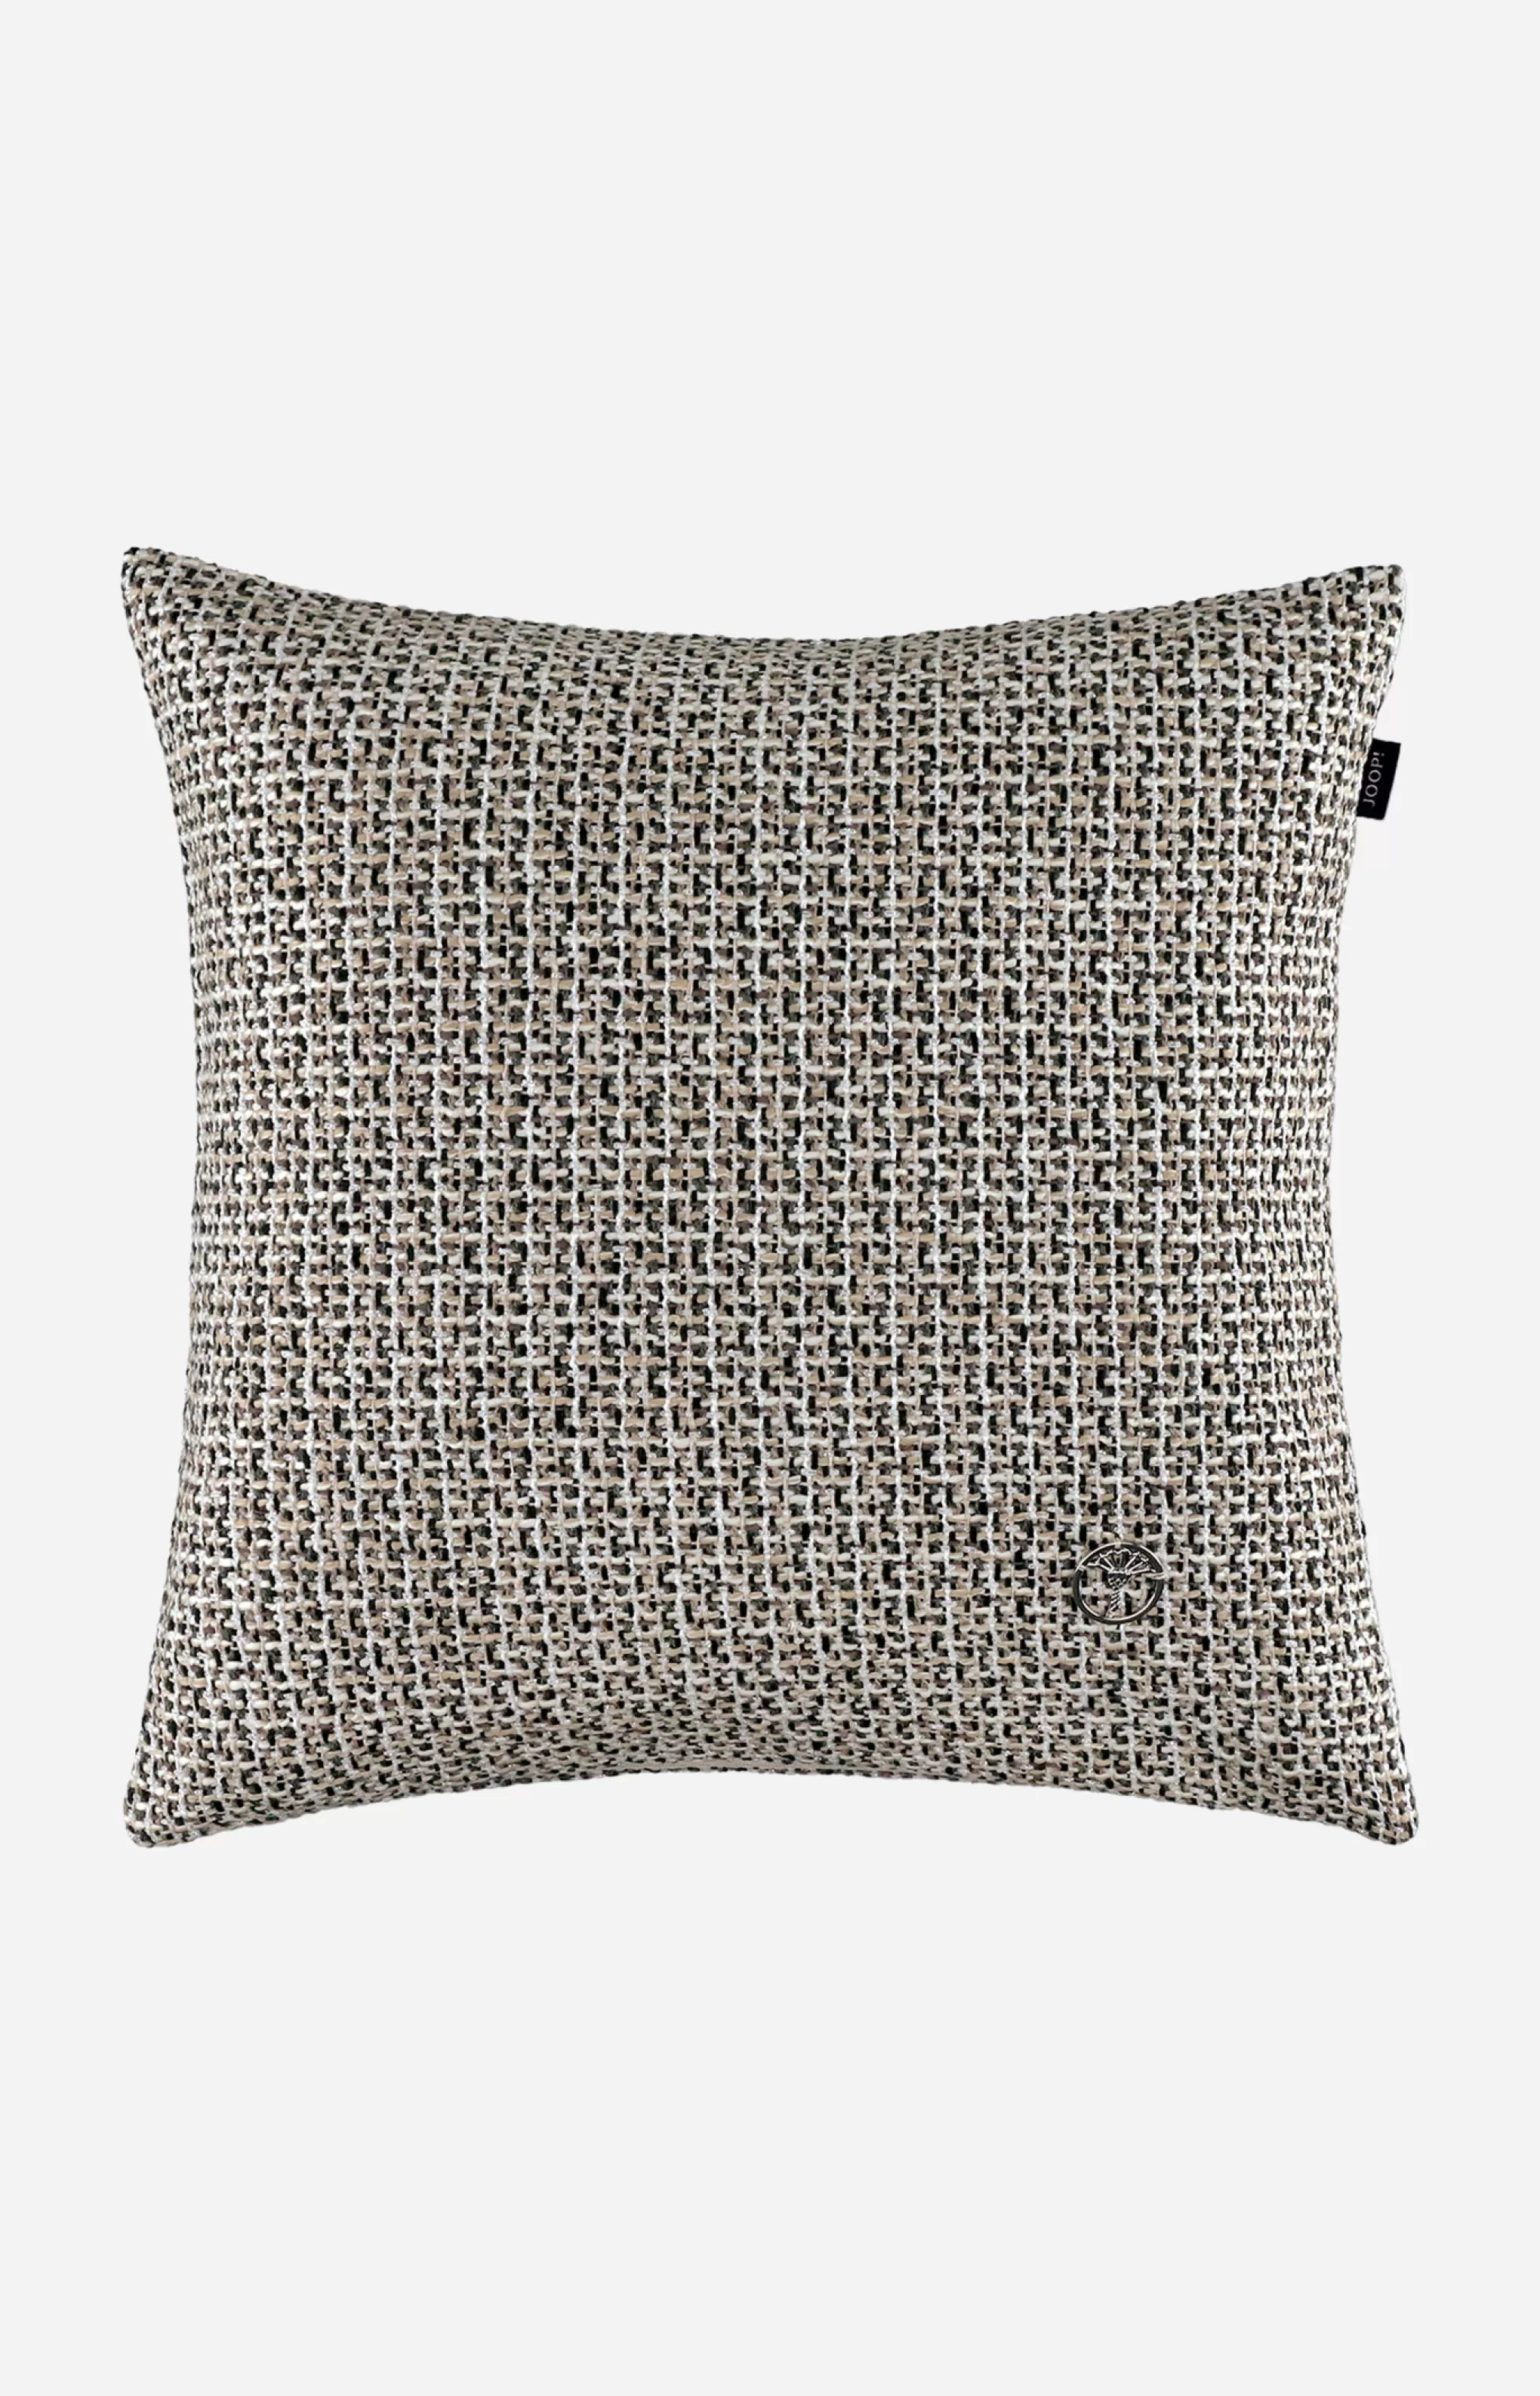 Decorative Cushions | Discover Everything*JOOP Decorative Cushions | Discover Everything ! GRAND Decorative Cushion Cover in